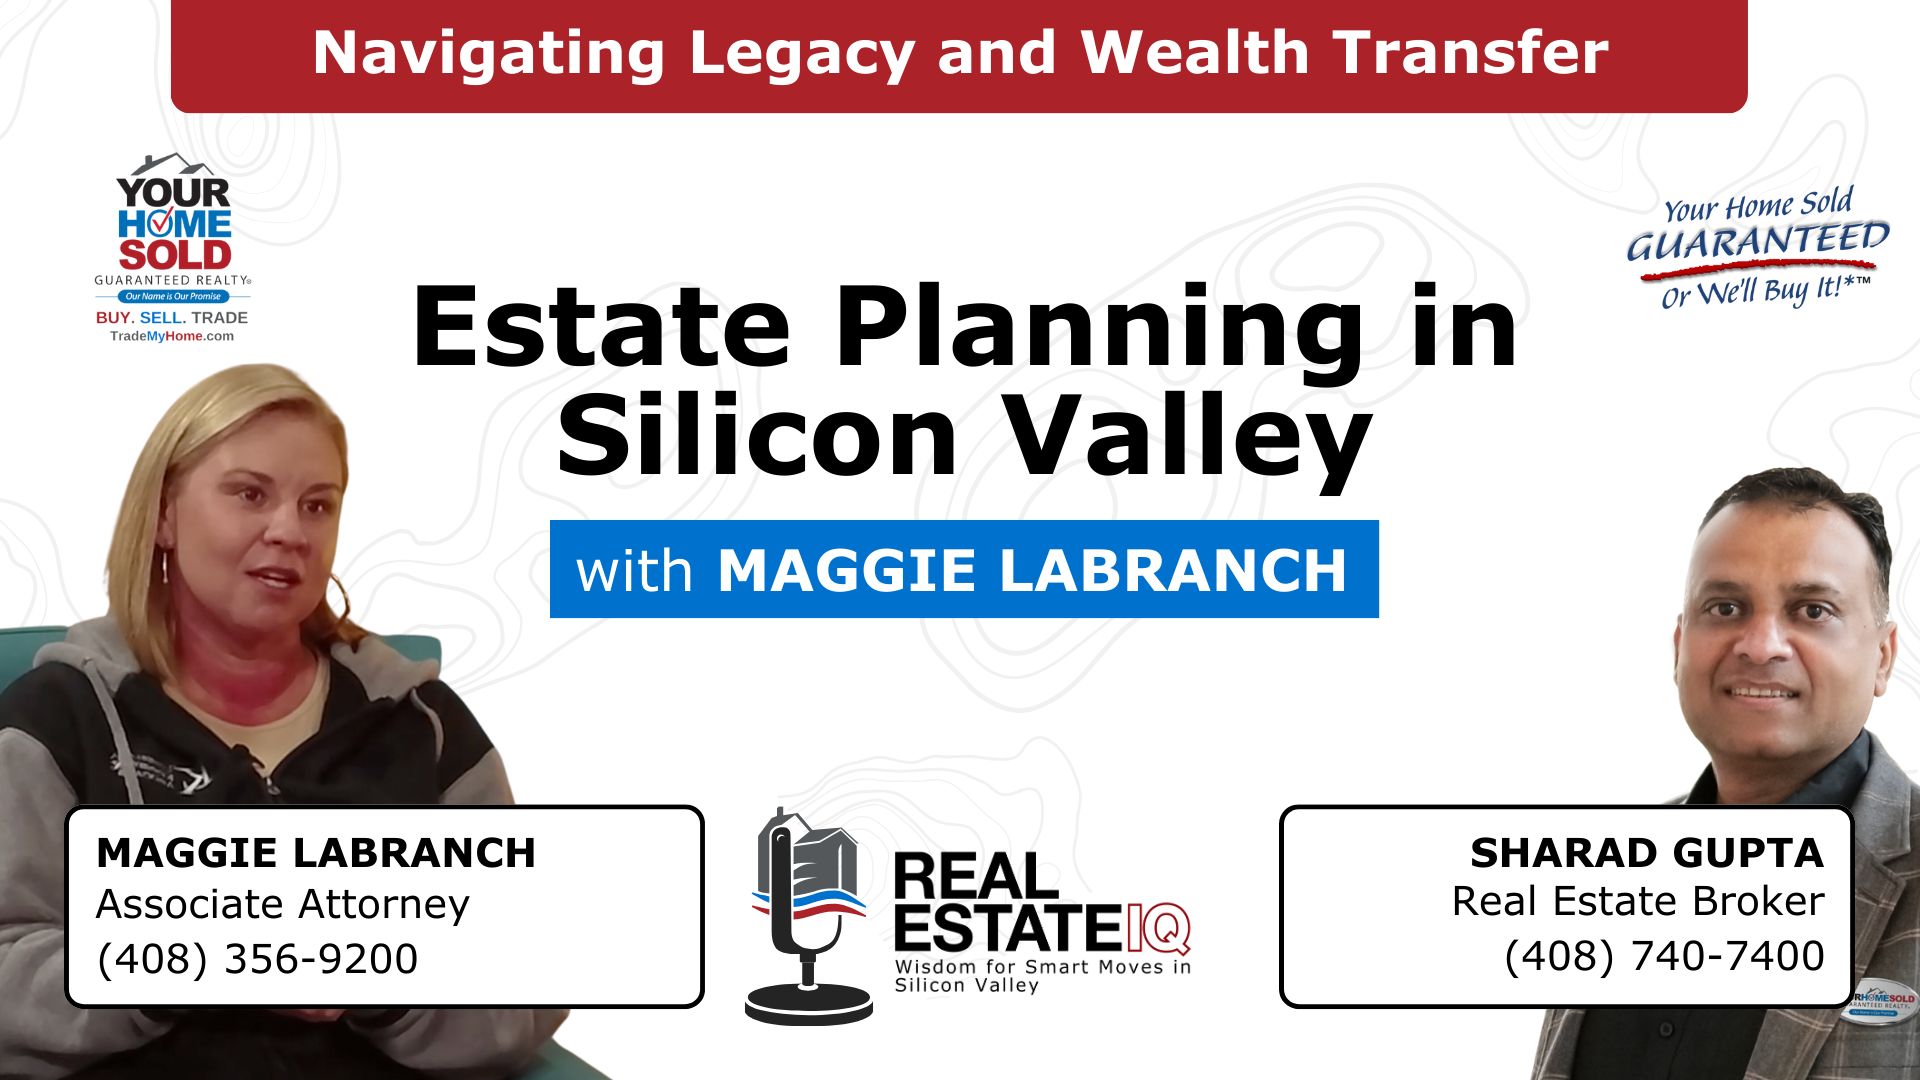 Estate Planning: Navigating Legacy and Wealth Transfer in Silicon Valley Video